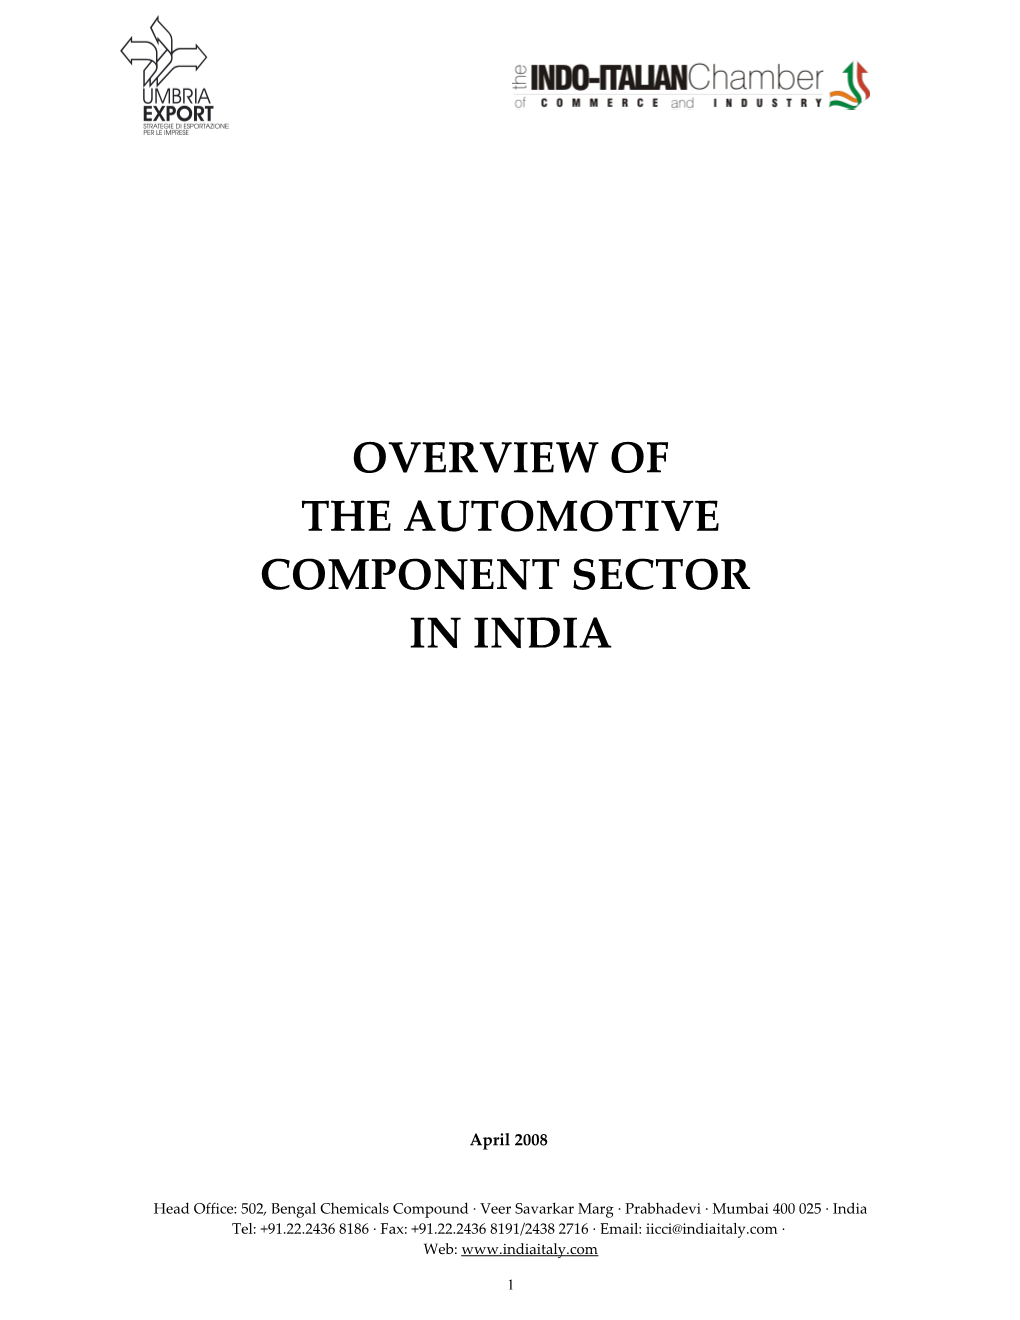 The Automotive Component Sector